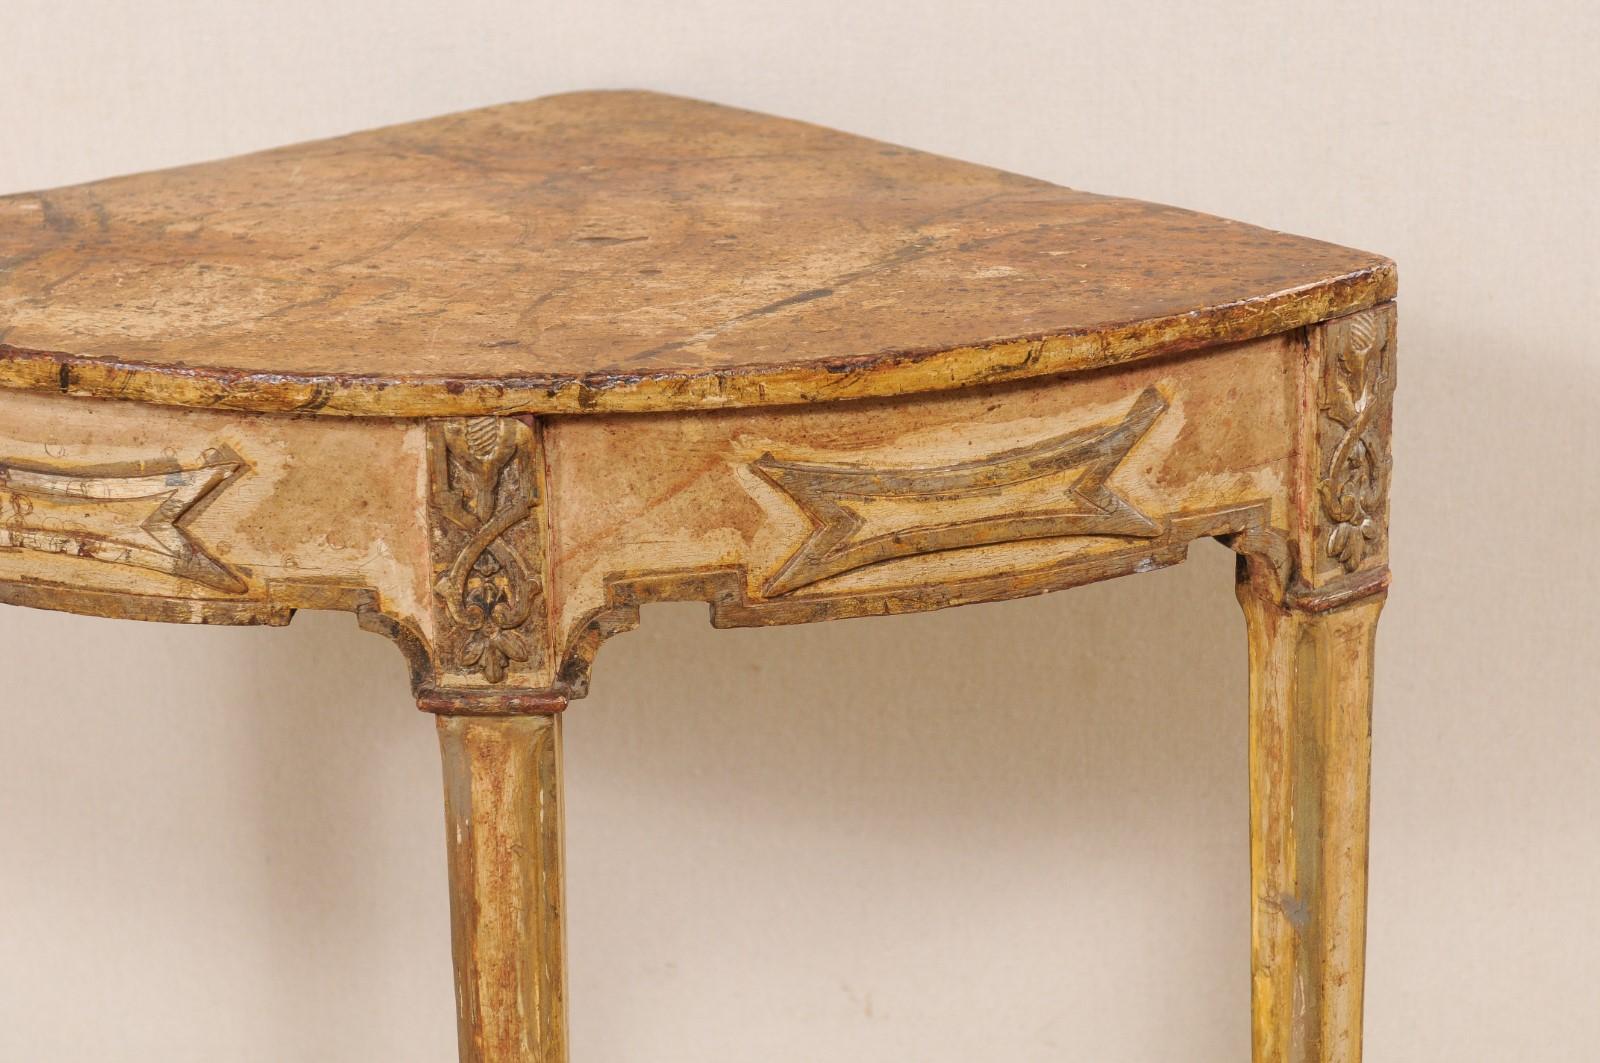 Wood Italian Three-Legged Corner Table with Faux Marble Painted Top, Mid-20th Century For Sale